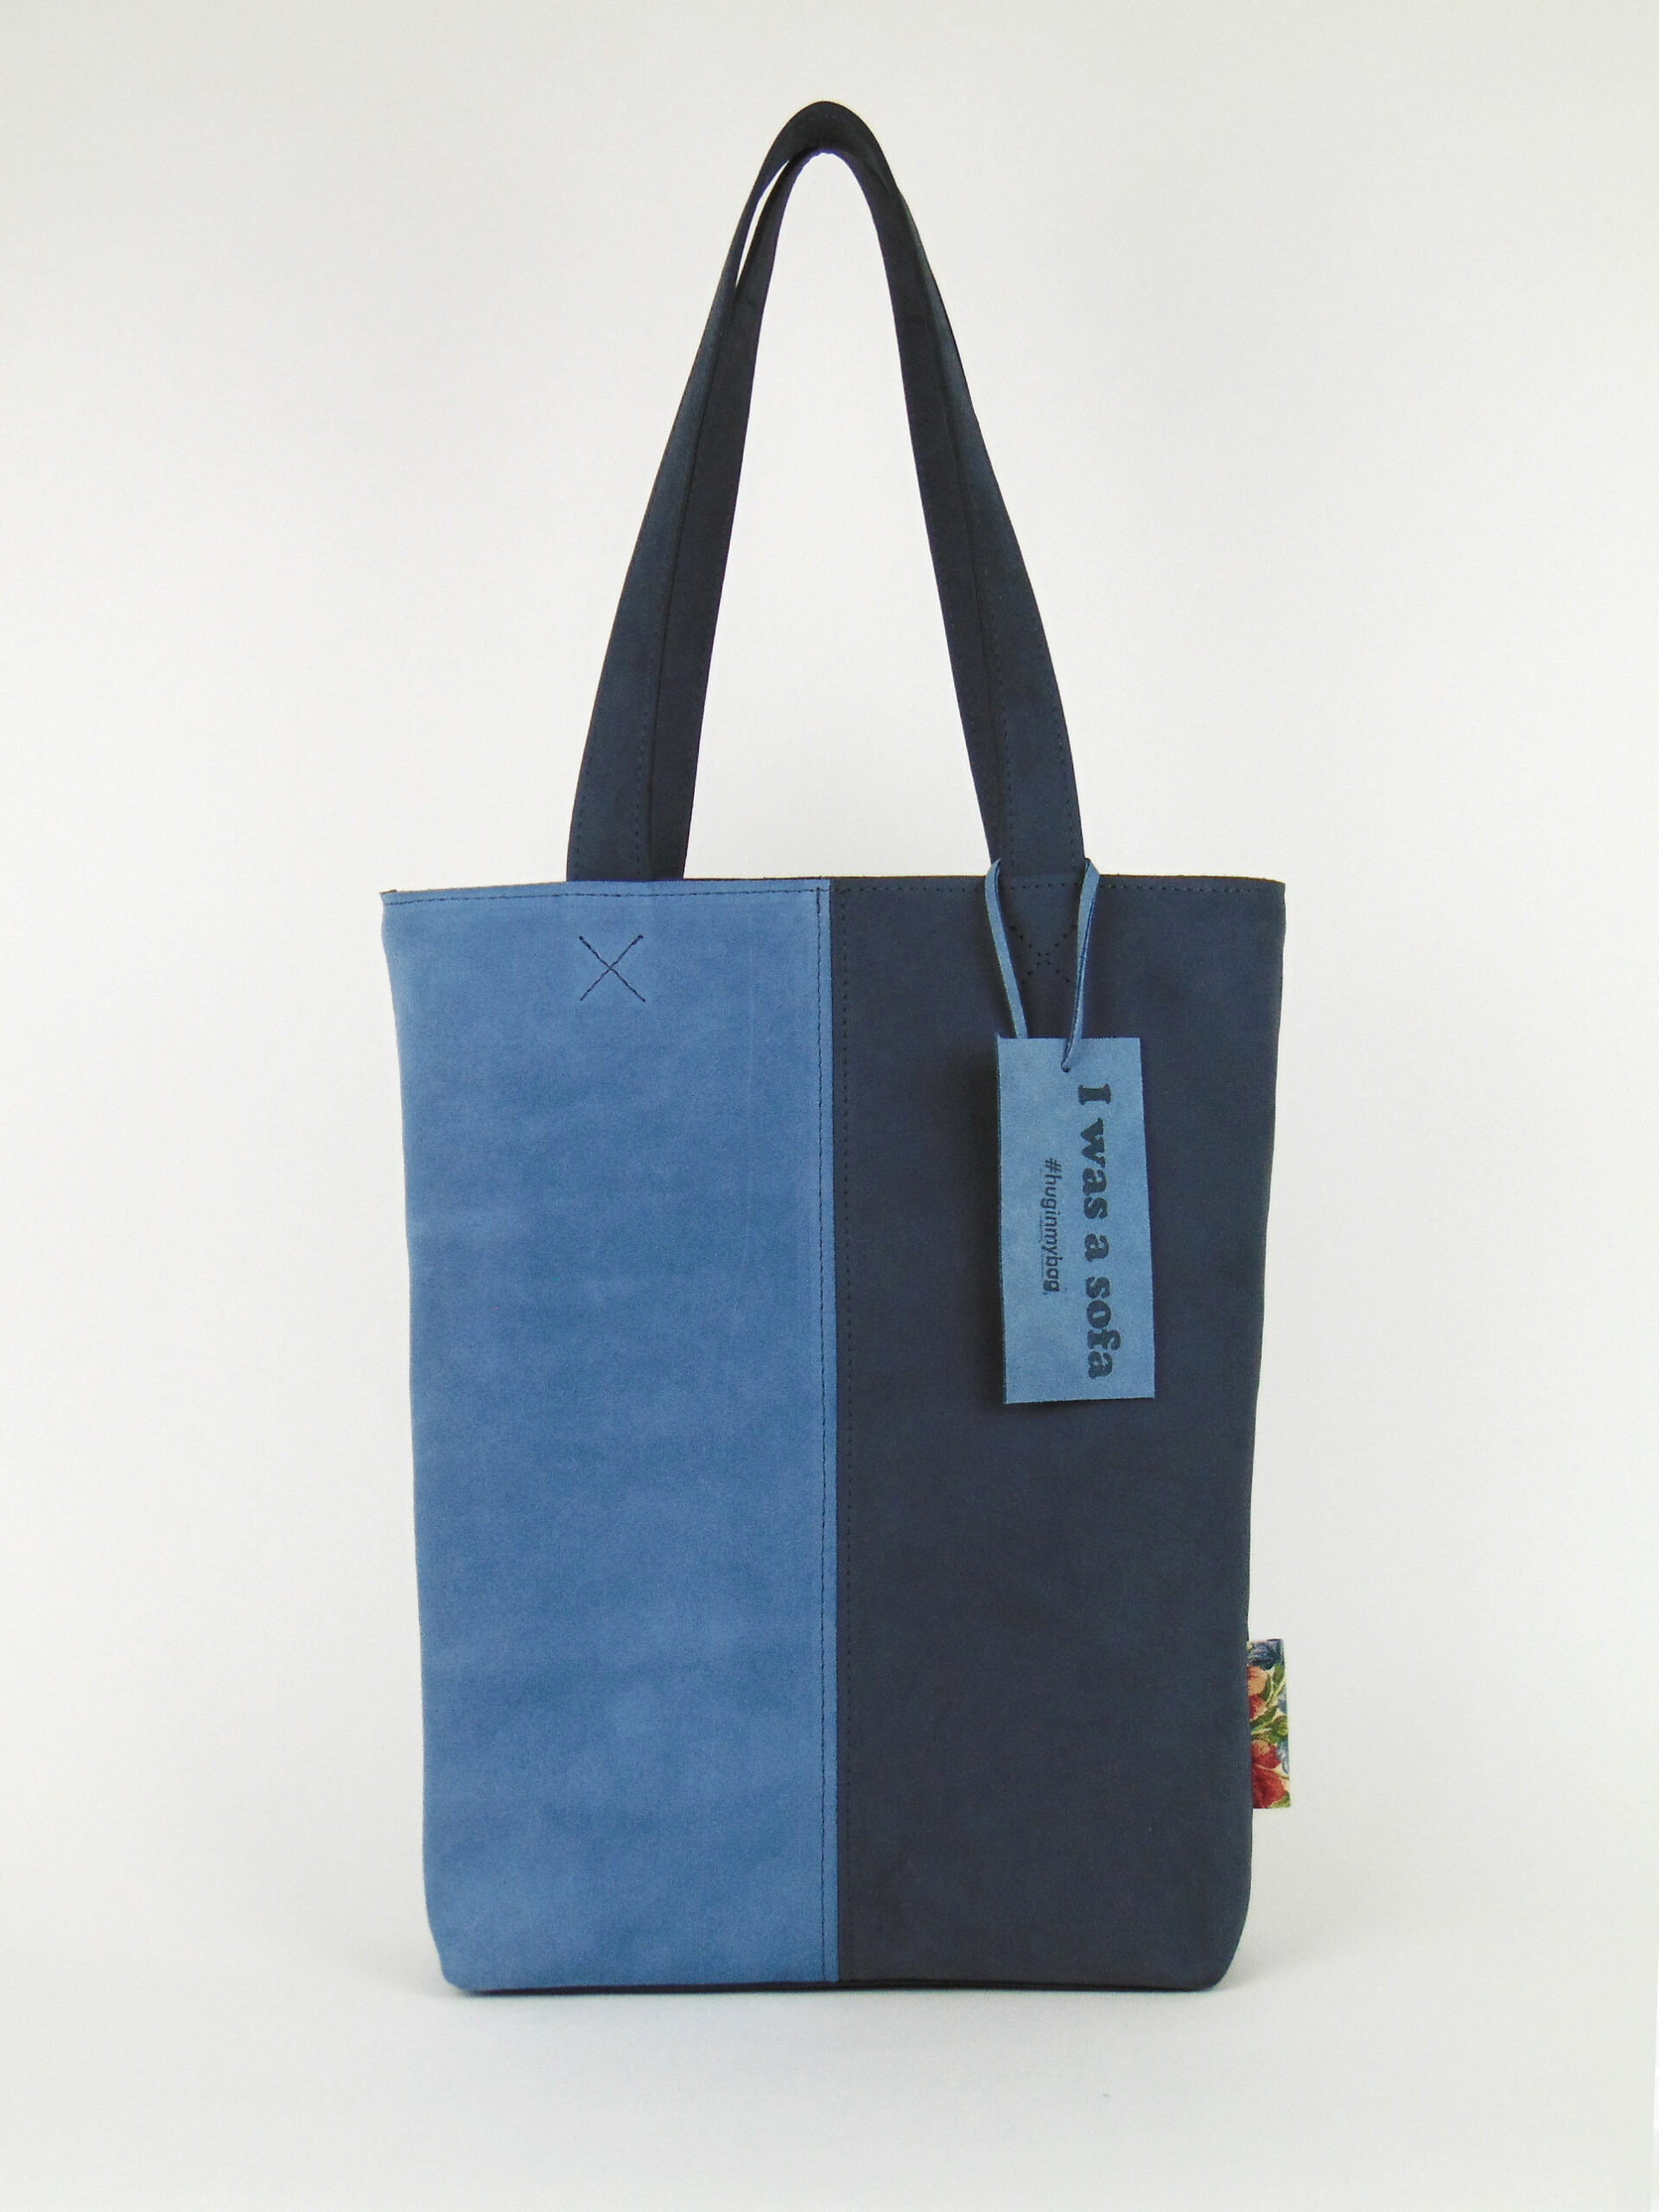 Product image of the shopper named Misty Evening Sky. This shopper is made from recycled suede in a colour combination of light blue and dark blue